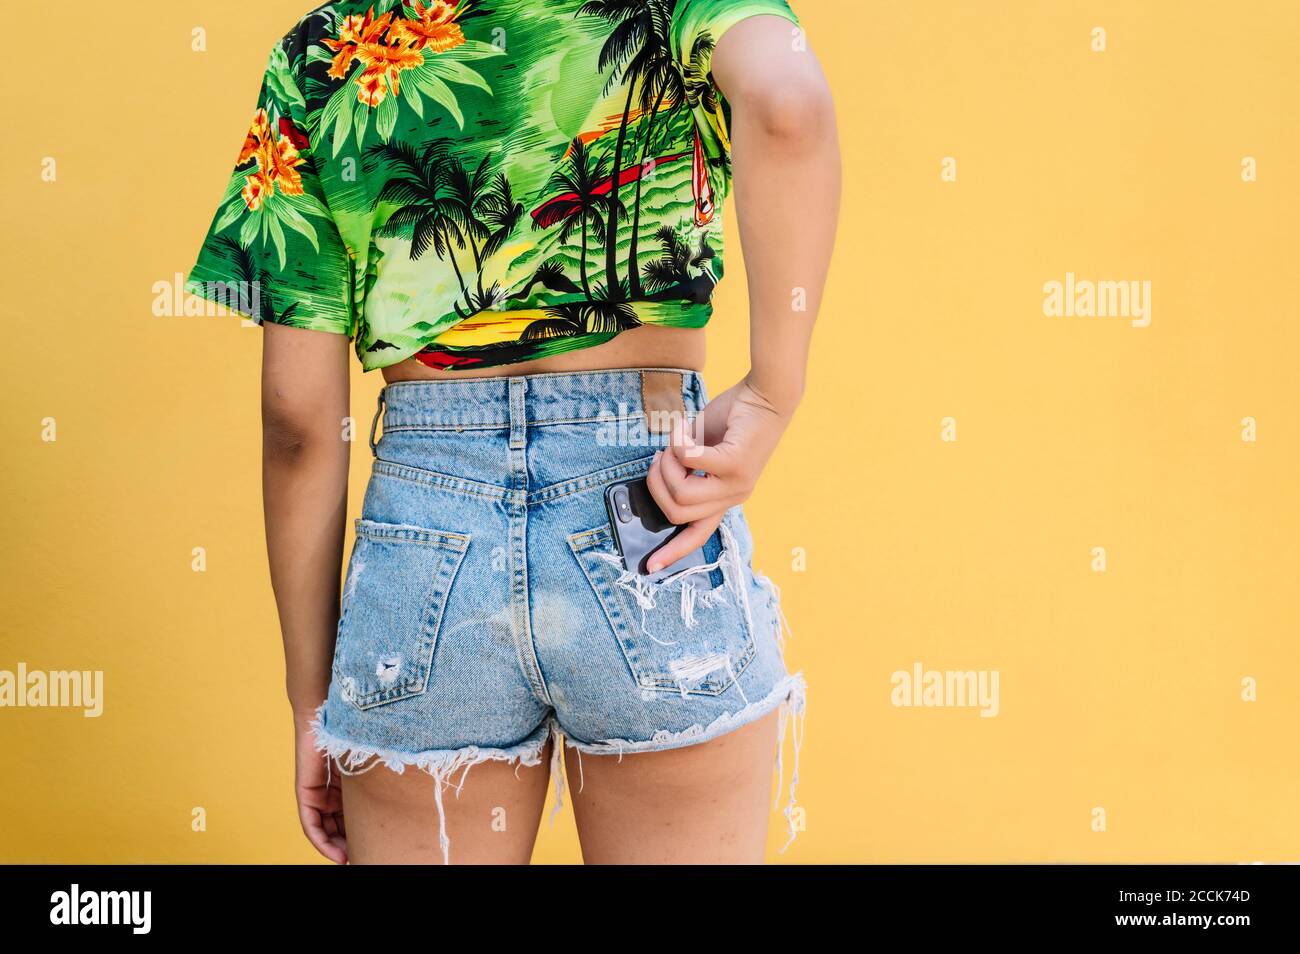 Rear view of young woman putting smartphone in pocket of jeans shorts Stock Photo